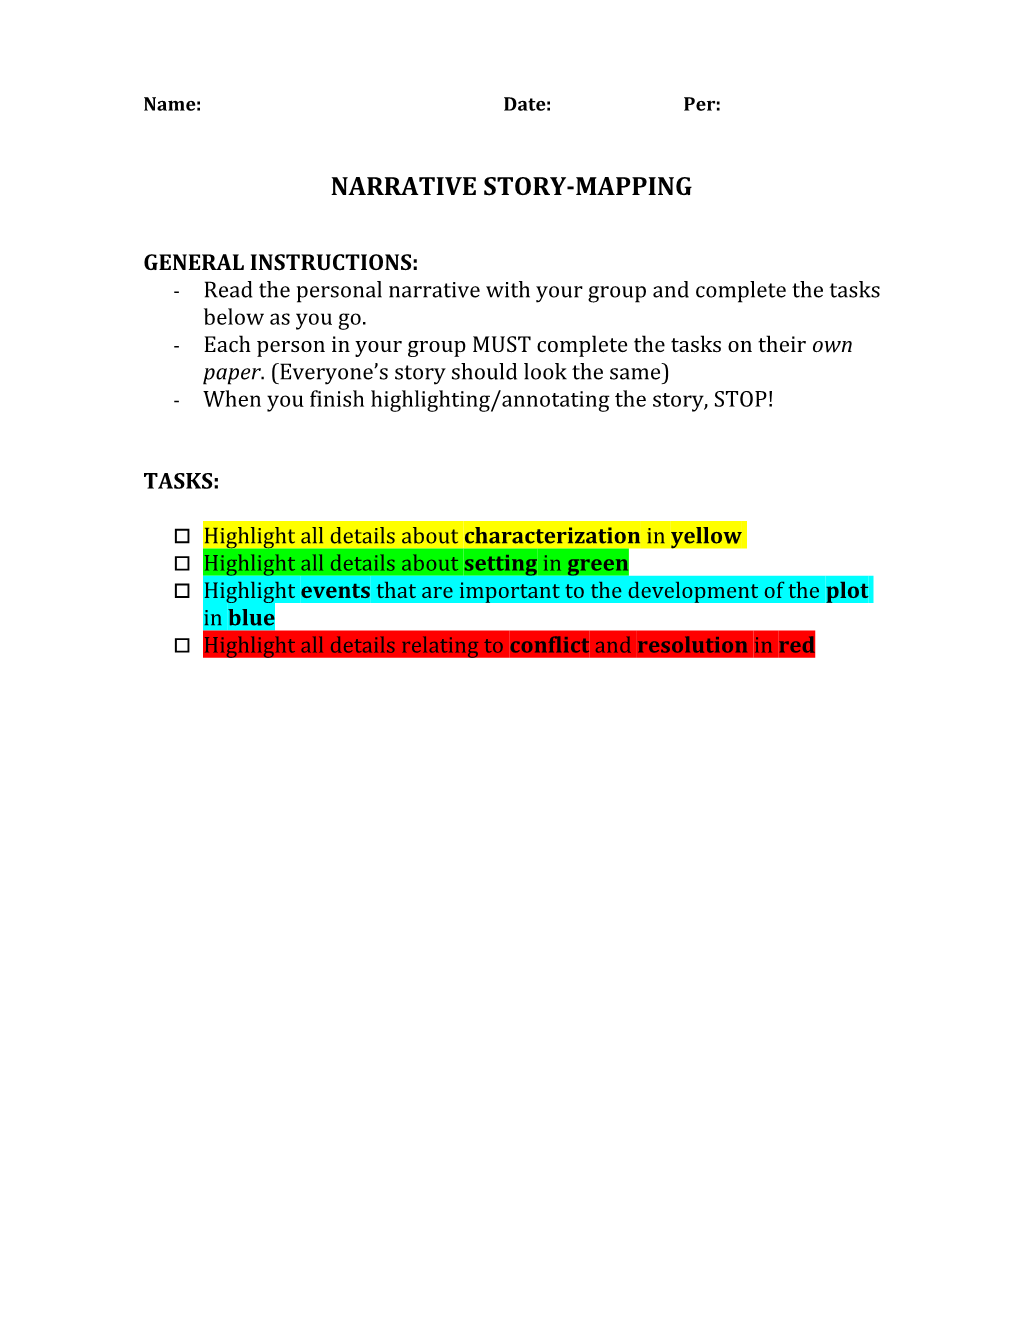 Narrative Story-Mapping